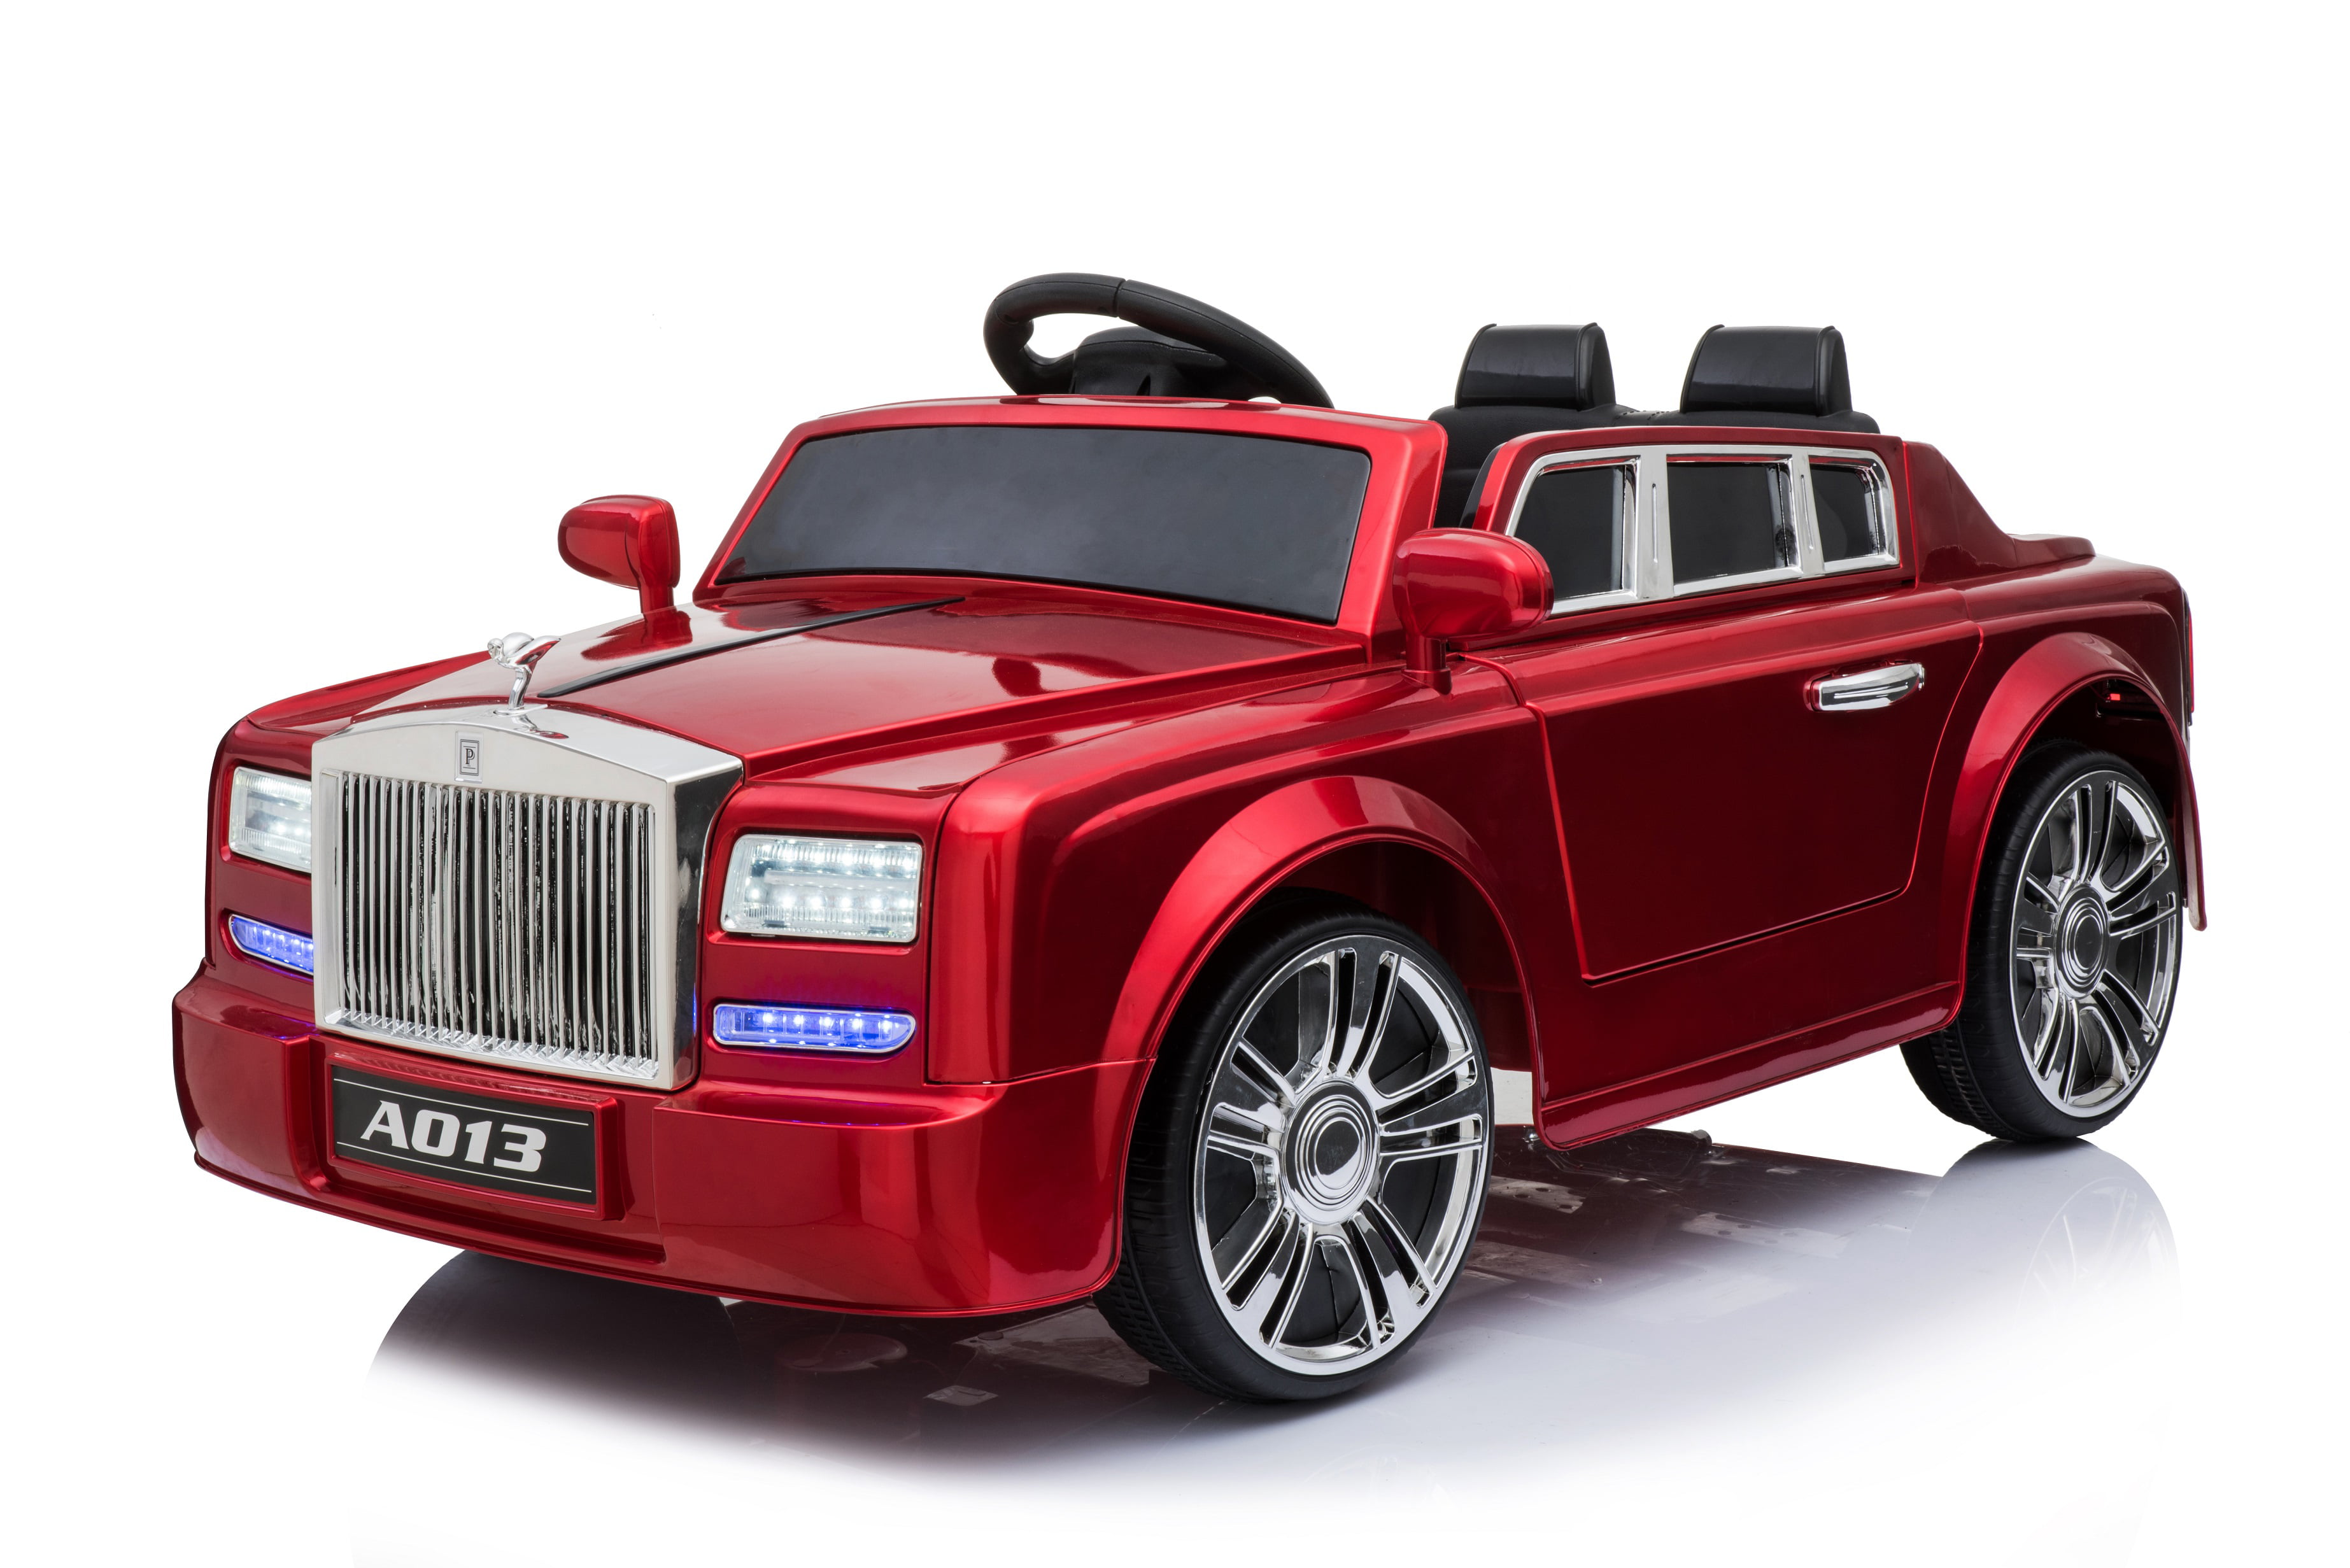 Buy Rolls Royce Battery Operated Ride On Car Online  Isakaa Toys